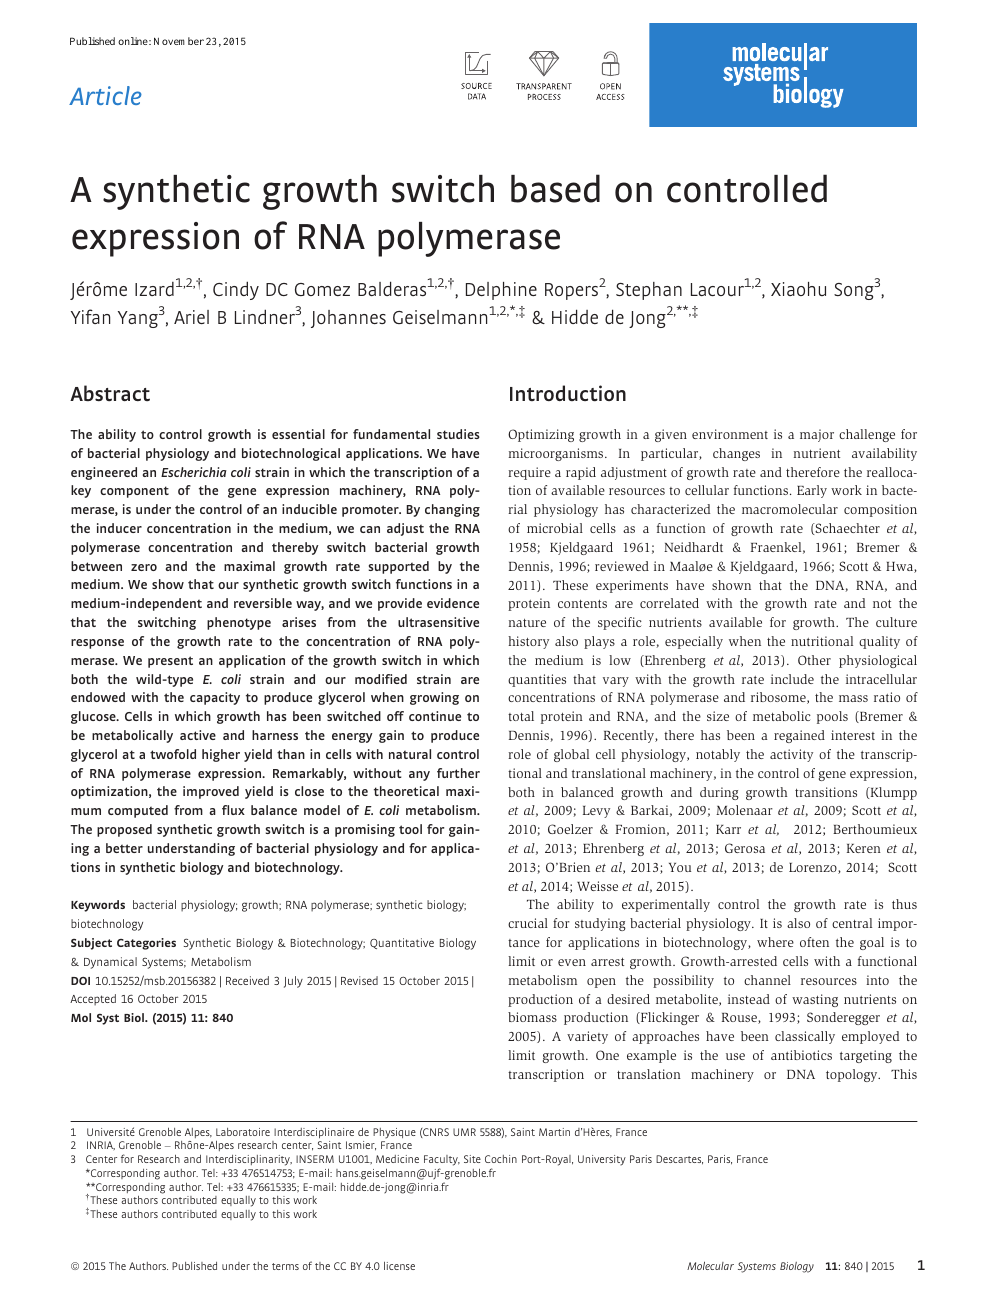 A Synthetic Growth Switch Based On Controlled Expression Of Rna Polymerase Topic Of Research Paper In Biological Sciences Download Scholarly Article Pdf And Read For Free On Cyberleninka Open Science Hub